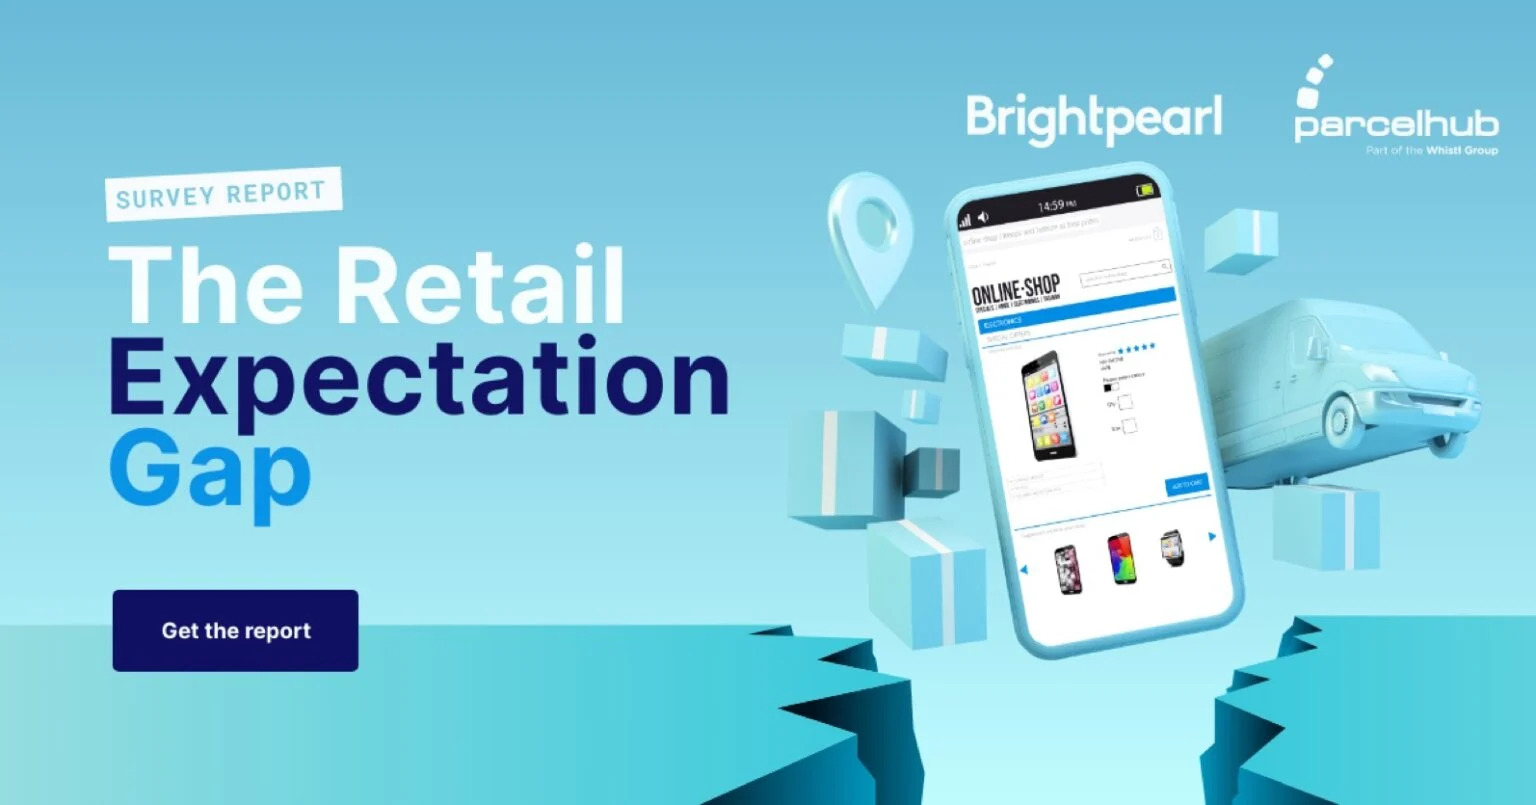 Find The Retail Expectation Gap Report from BrightPearl and ParcelHub (now part of the Whistl Group)